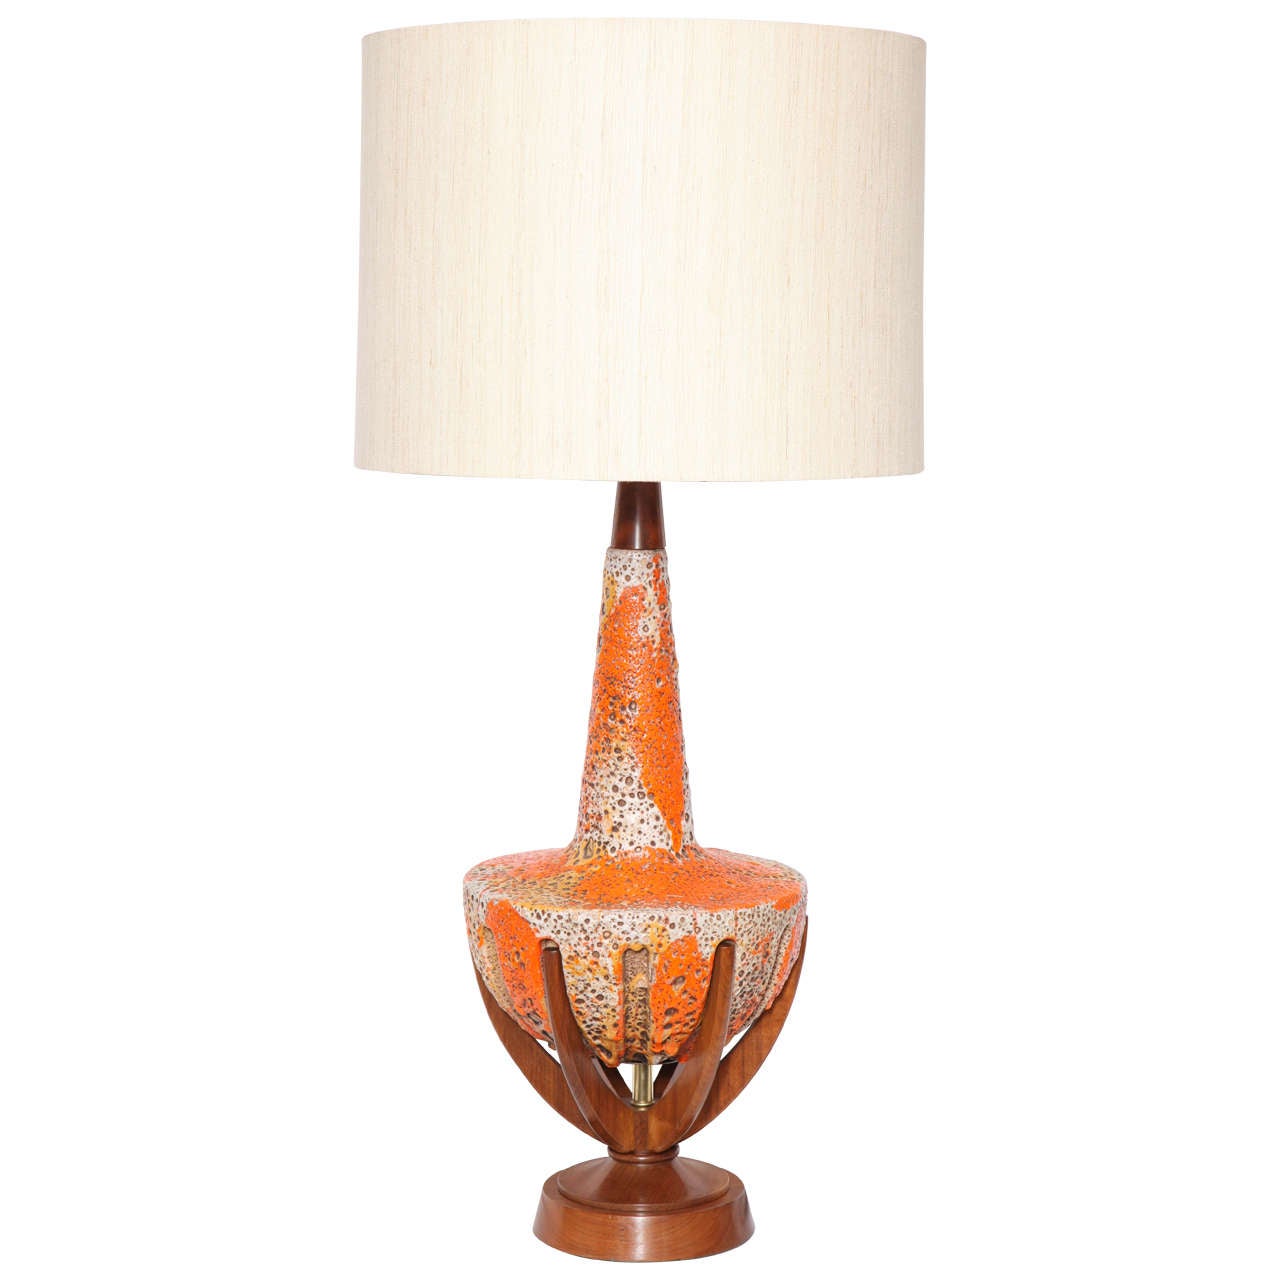 1950s Modernist Ceramic and Wood Table Lamp